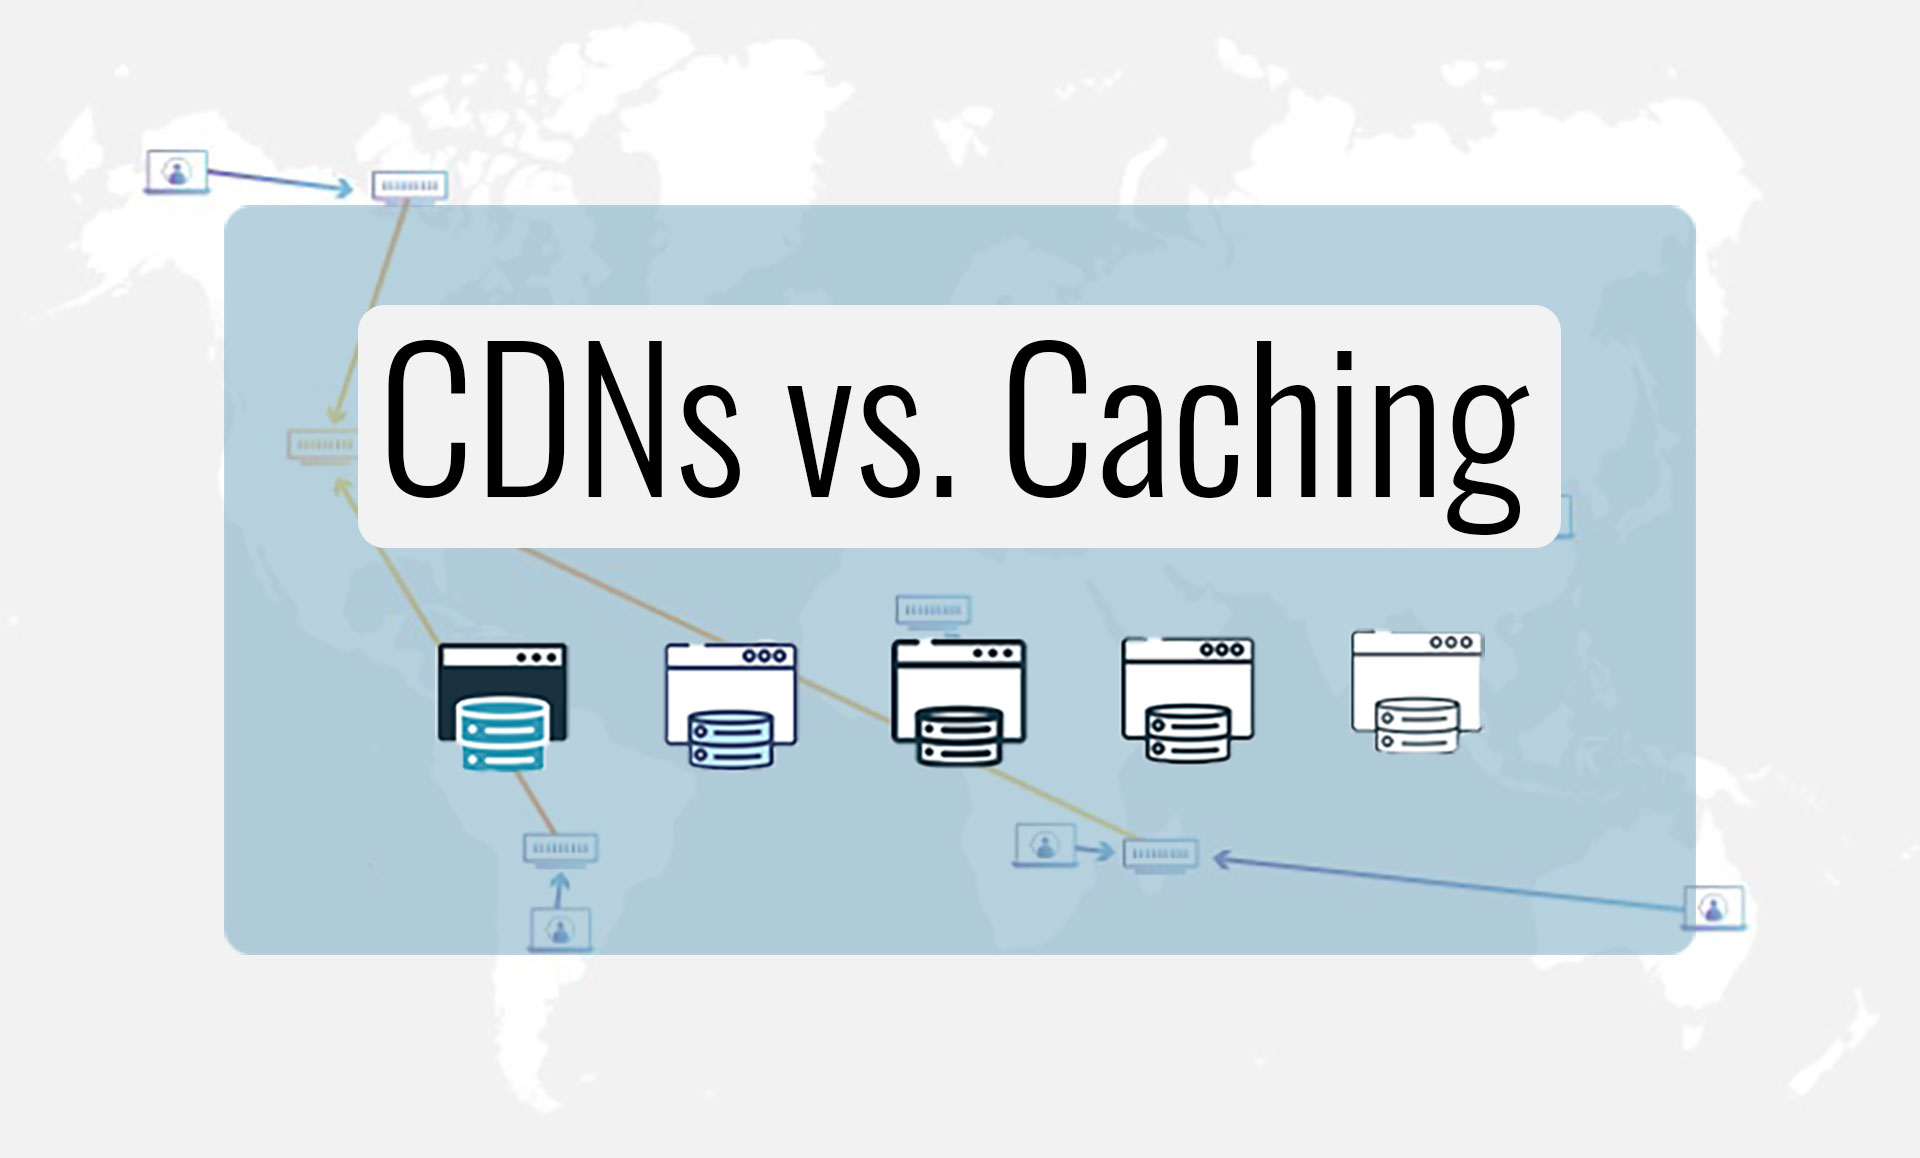 CDNs vs Caching: What Are They And How Are They Different?